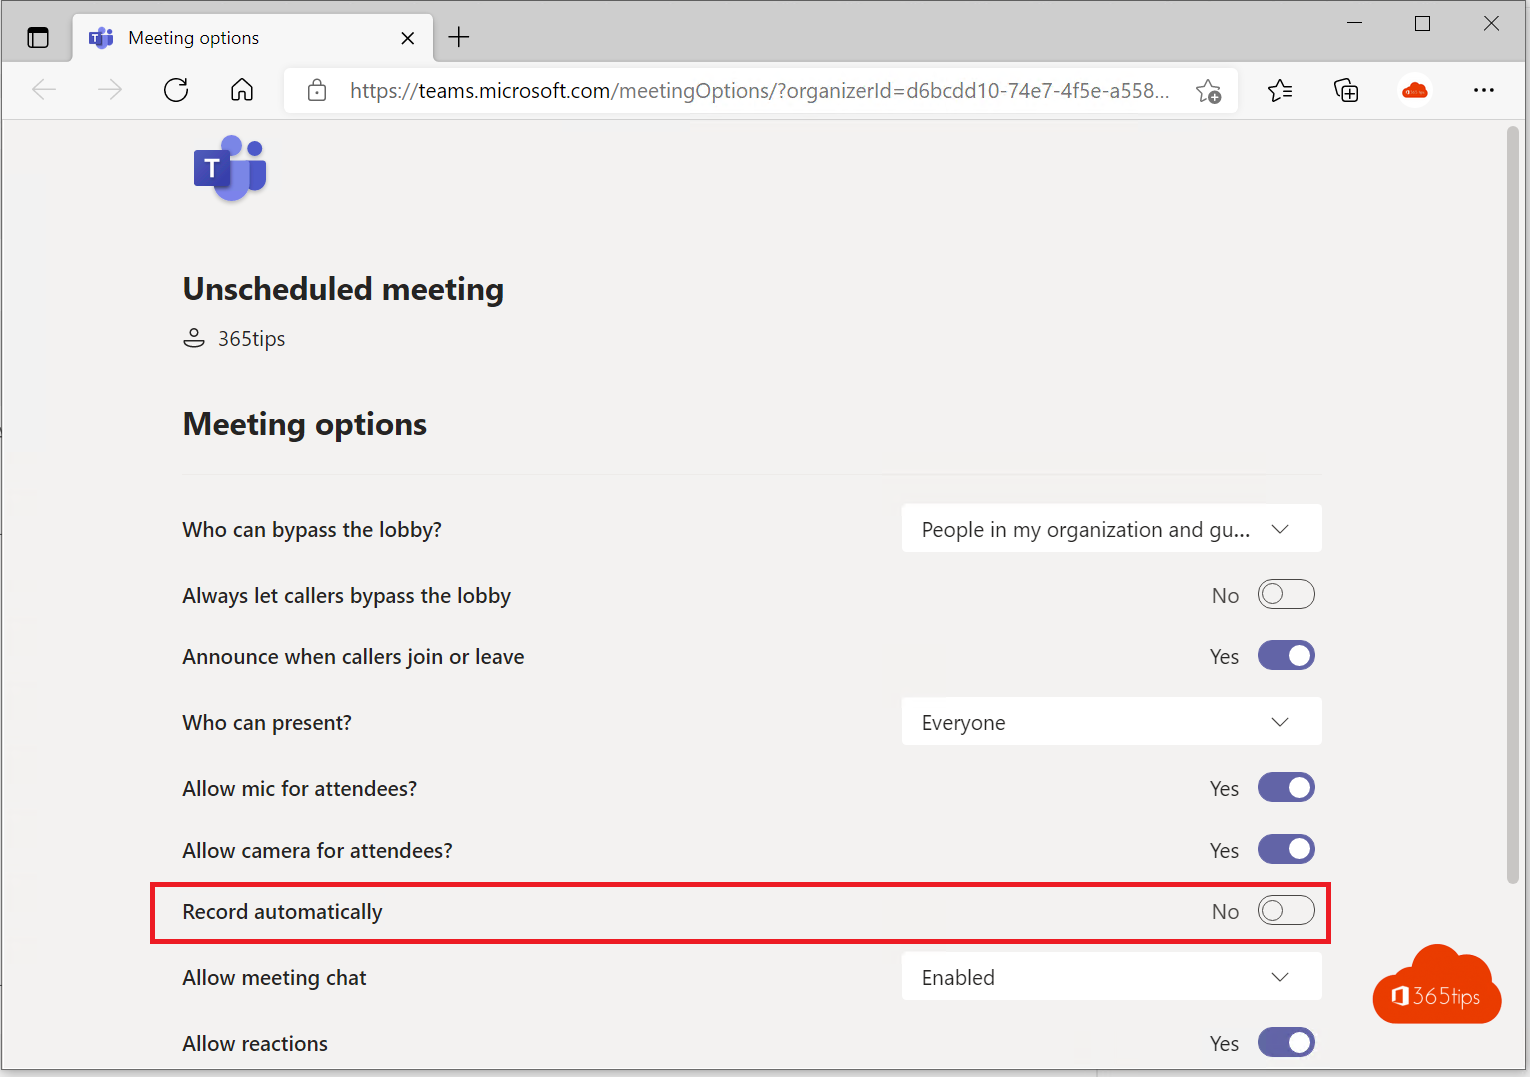 How to automatically delete meeting recordings in Microsoft Teams?